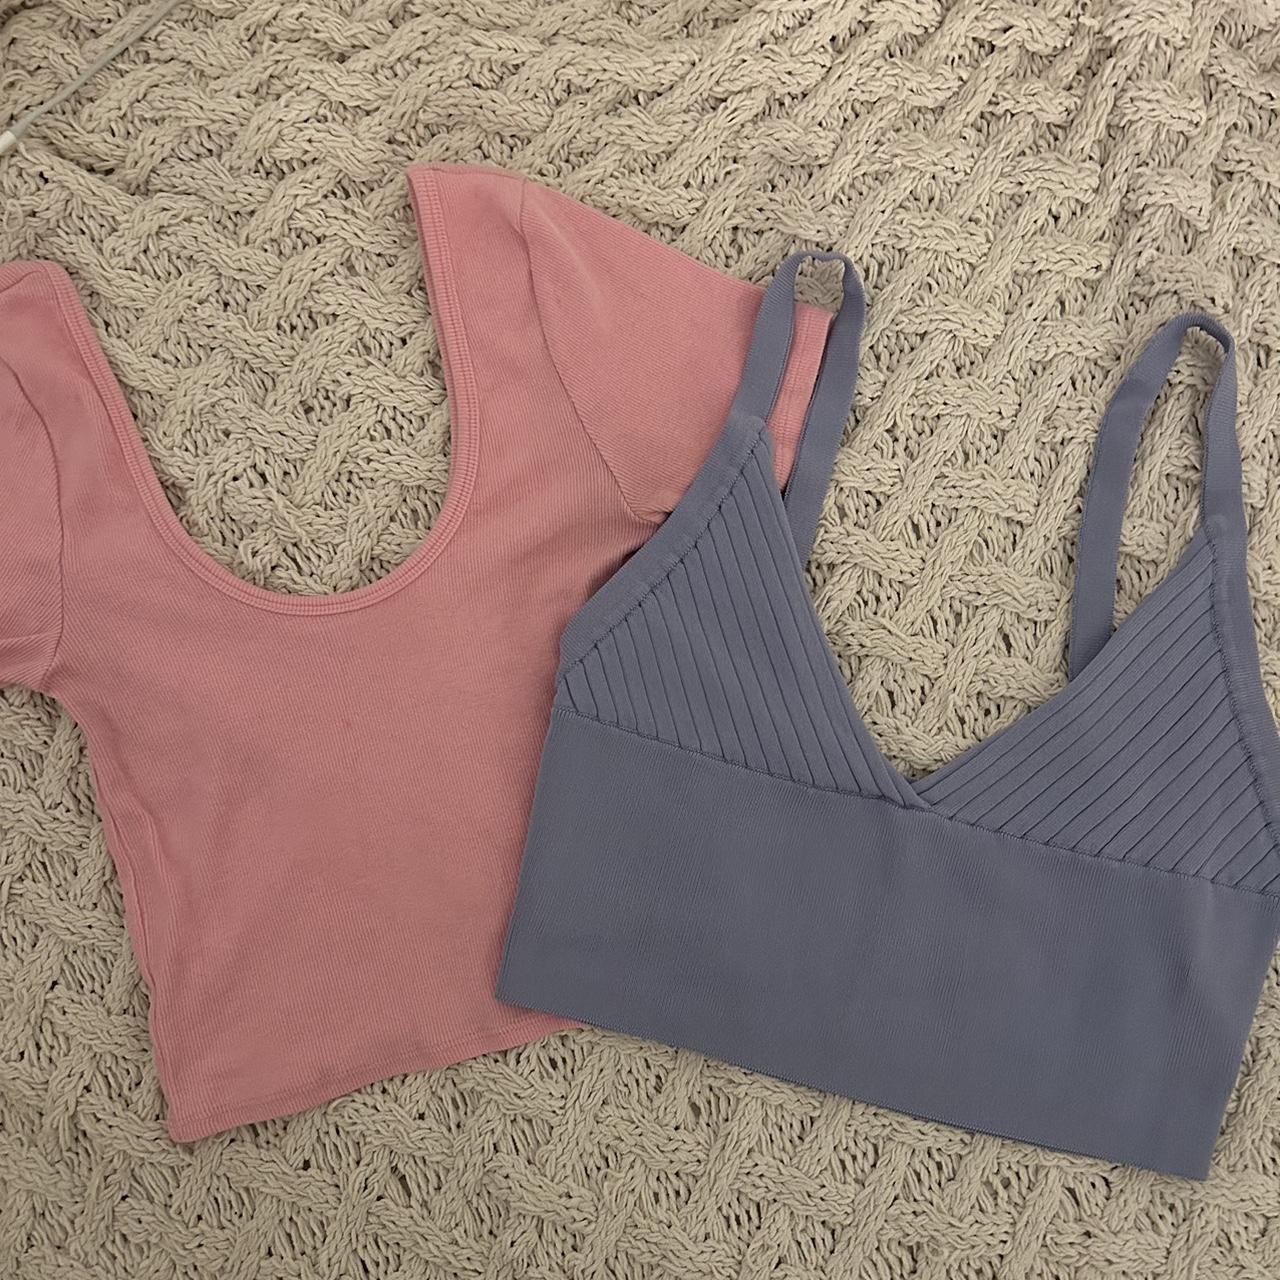 PacSun Women's Pink and Blue Crop-top